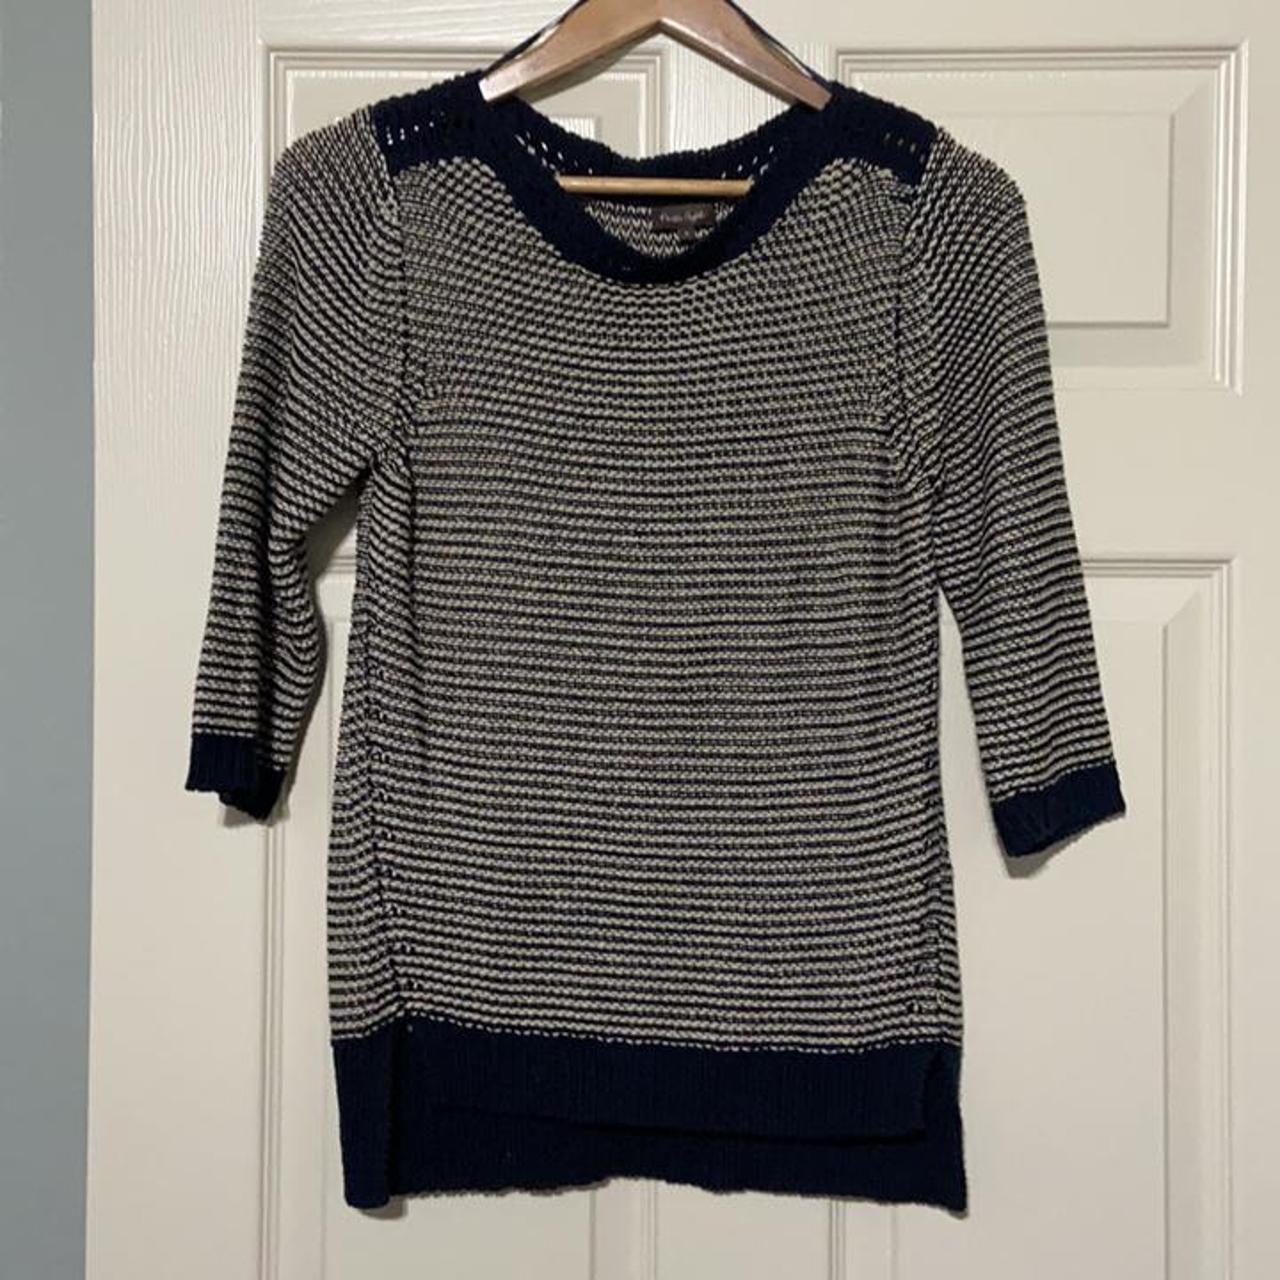 Product Image 1 - Phase Eight striped knit sweater.